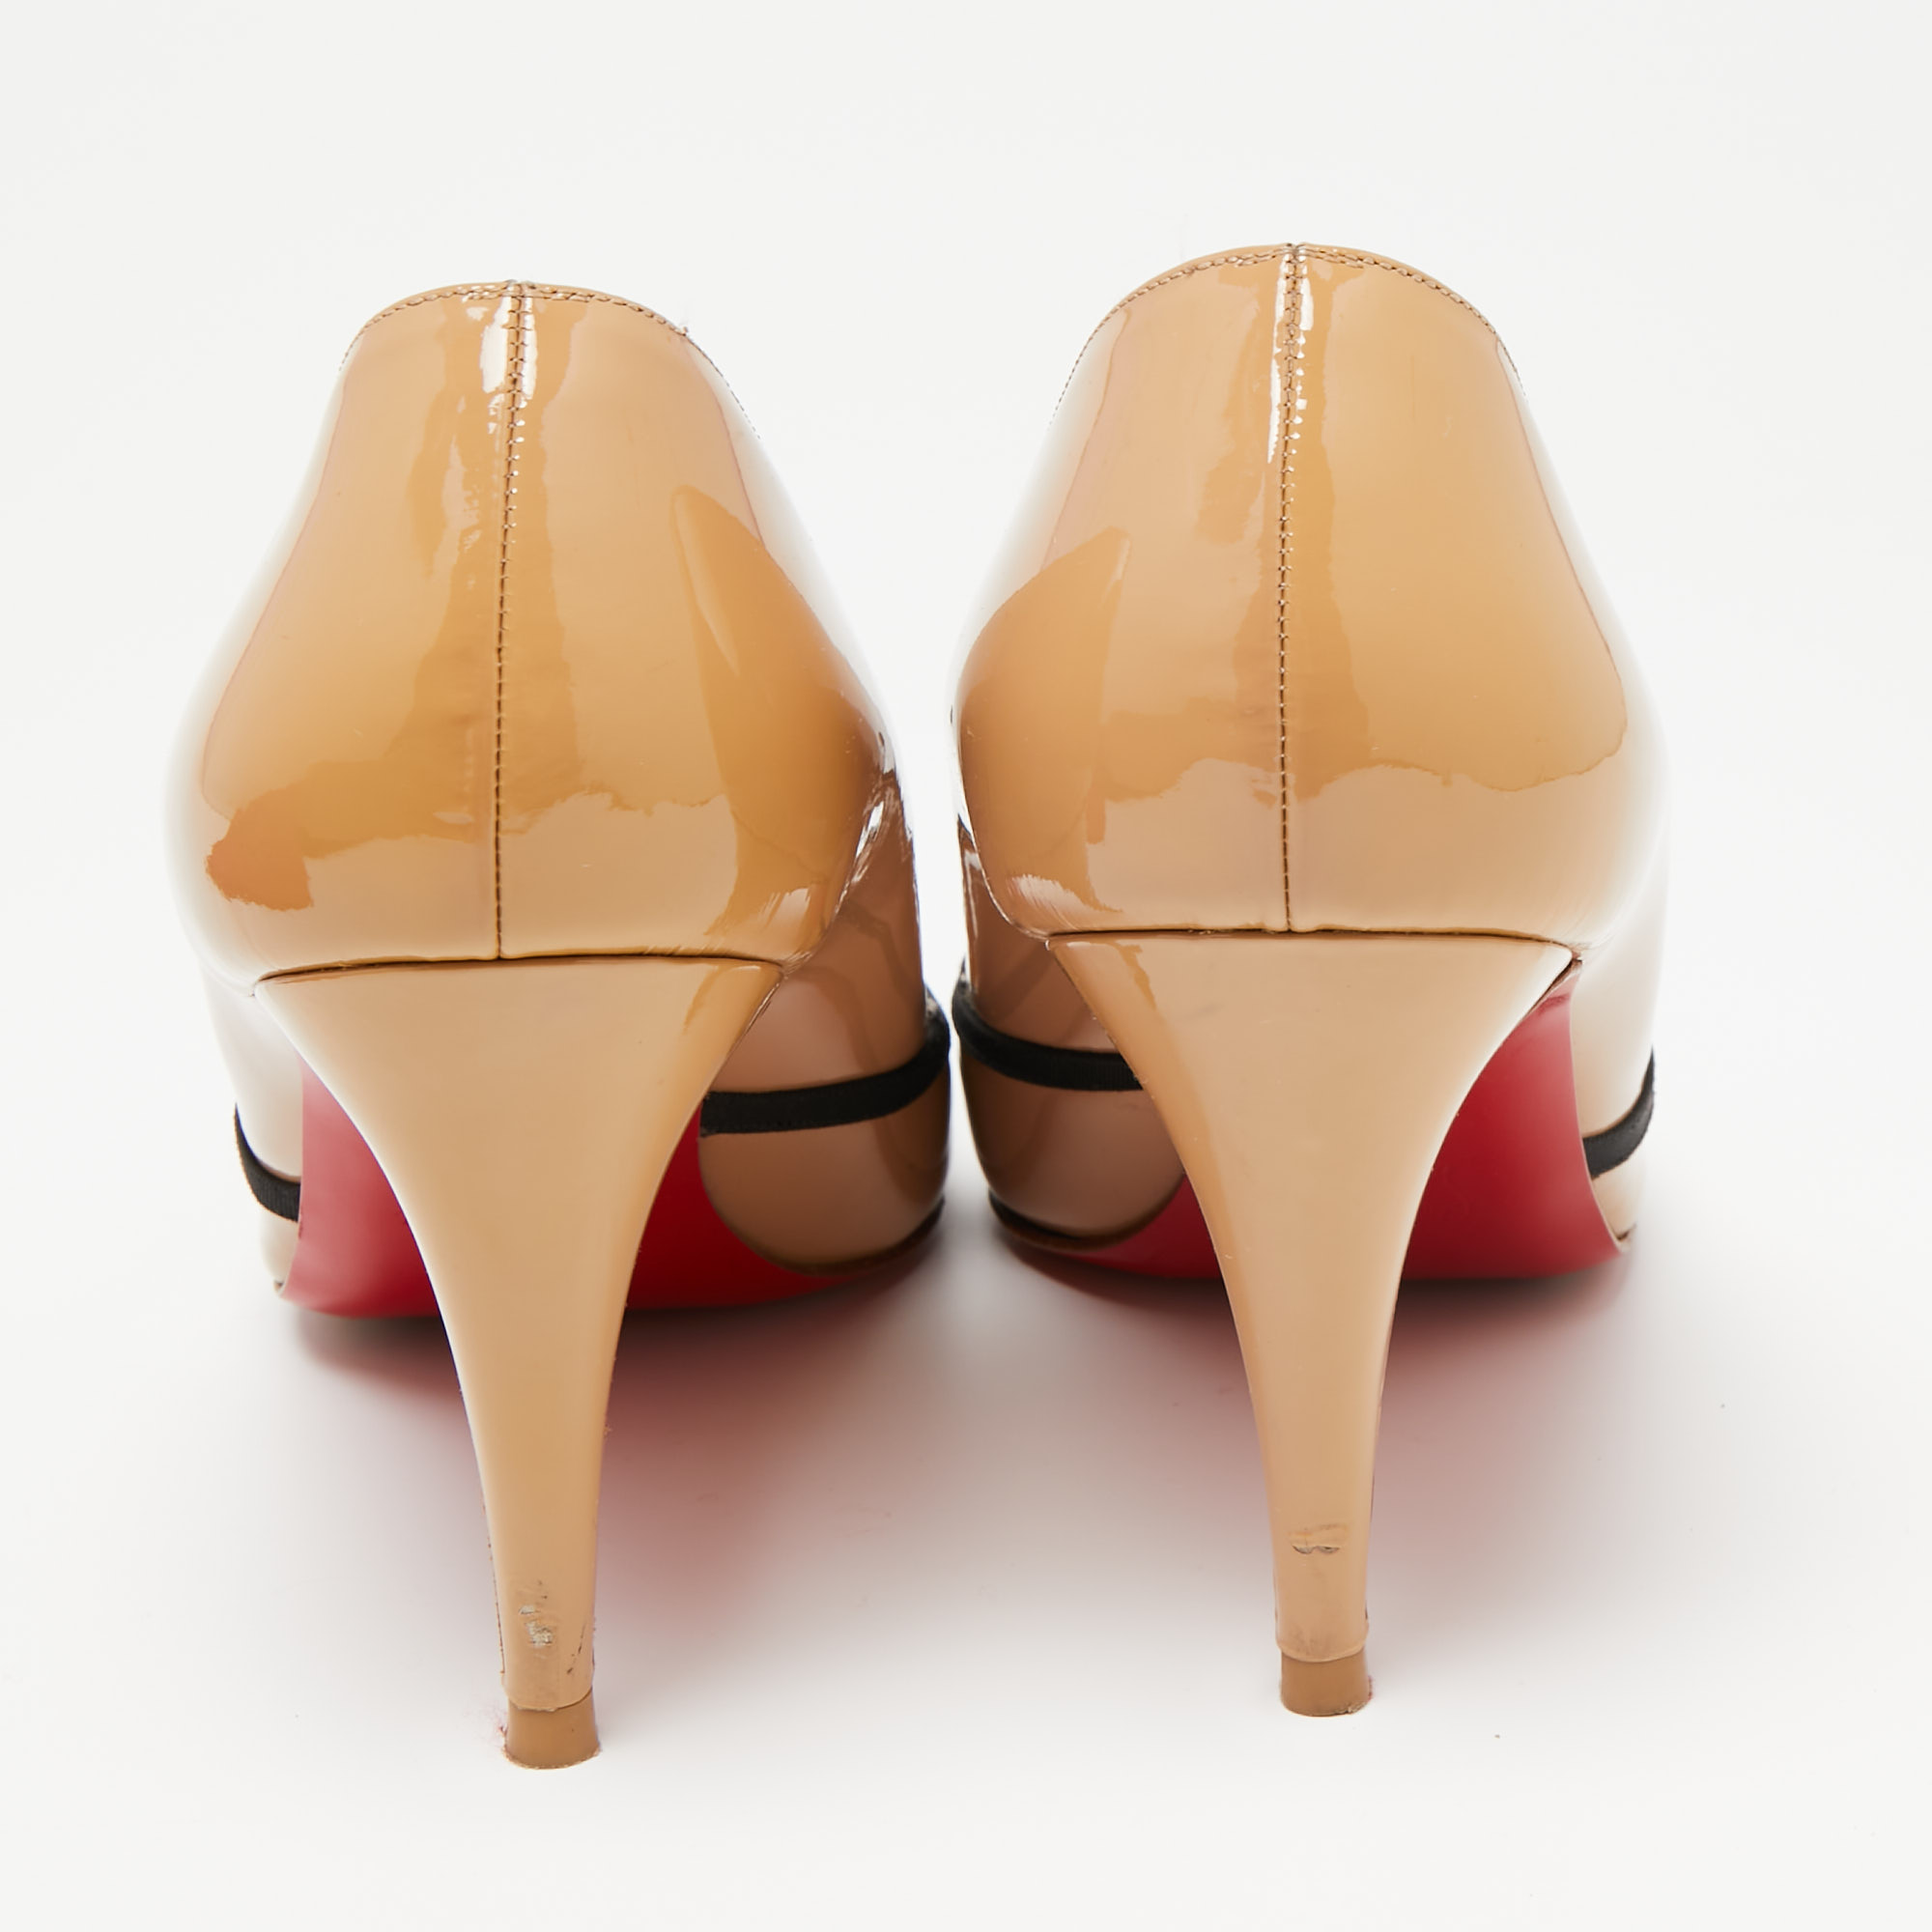 Christian Louboutin Beige Patent Leather Lavalliere Pumps Size 39.5